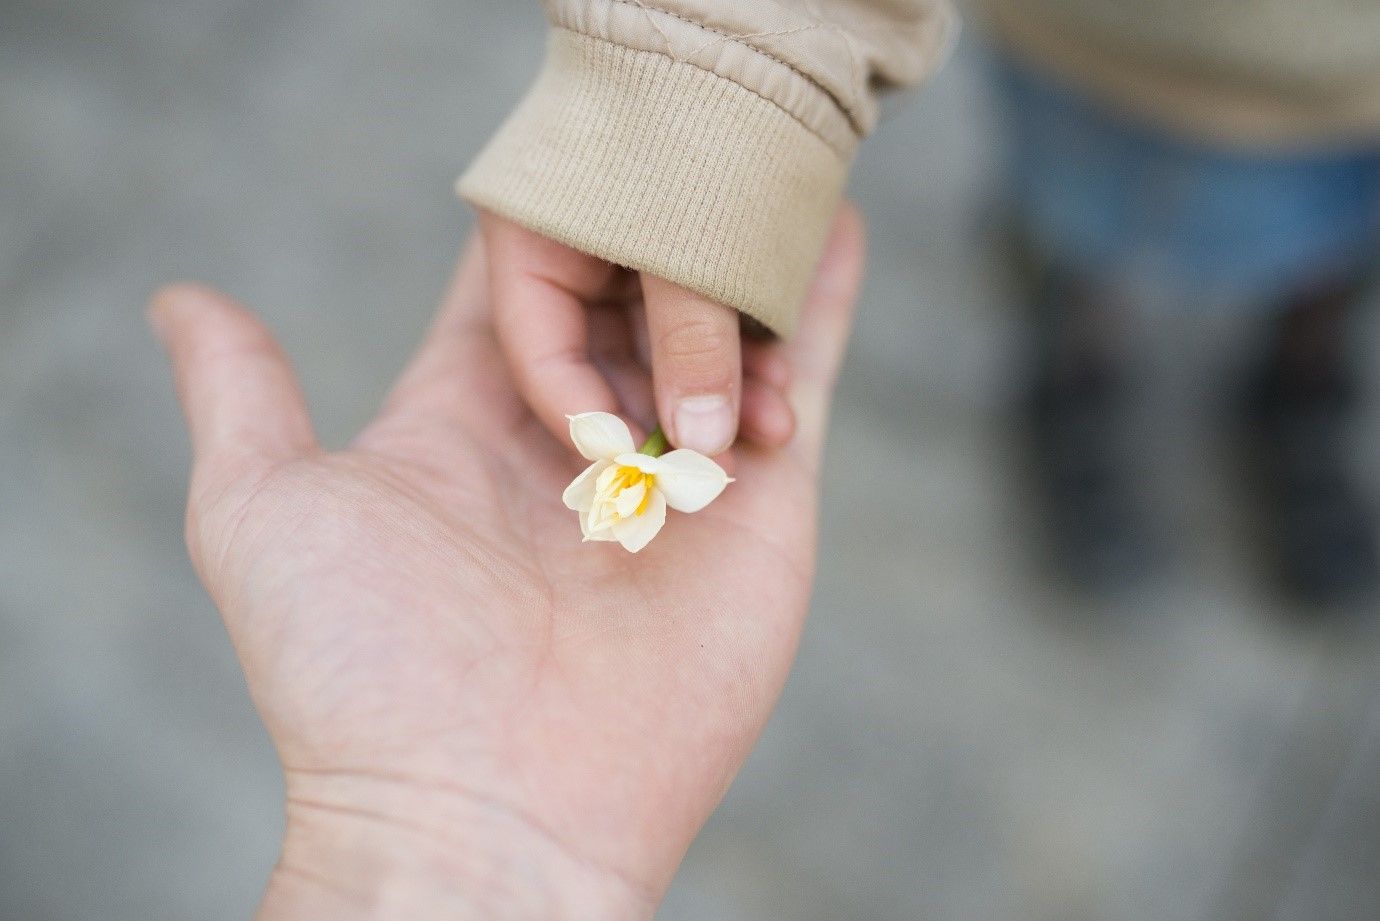 Child's hand with flower